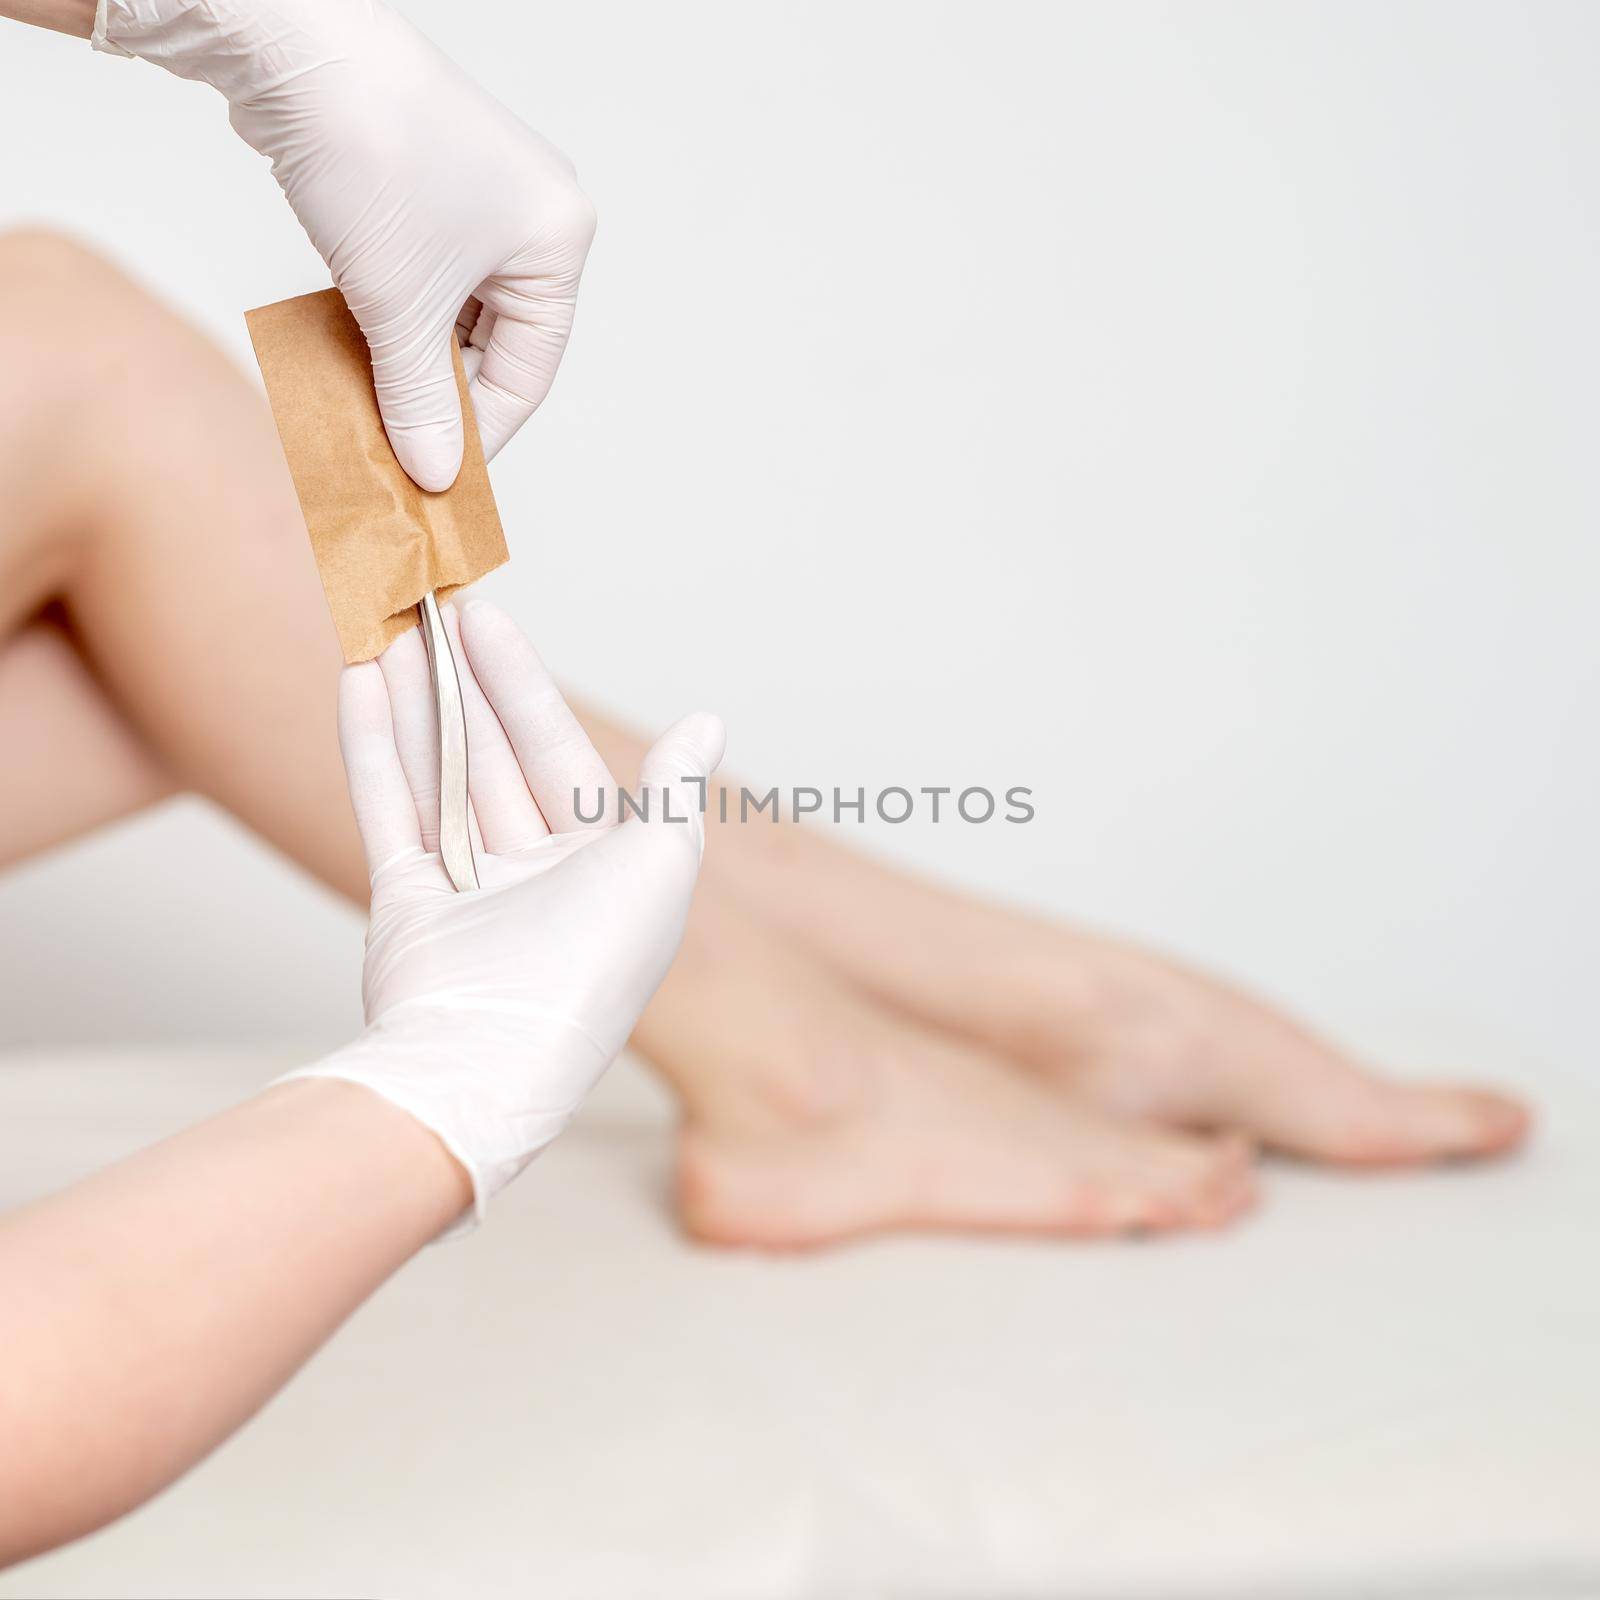 Human hands in protective gloves taking off medical or beauty tools from craft envelope before procedures on background of female legs